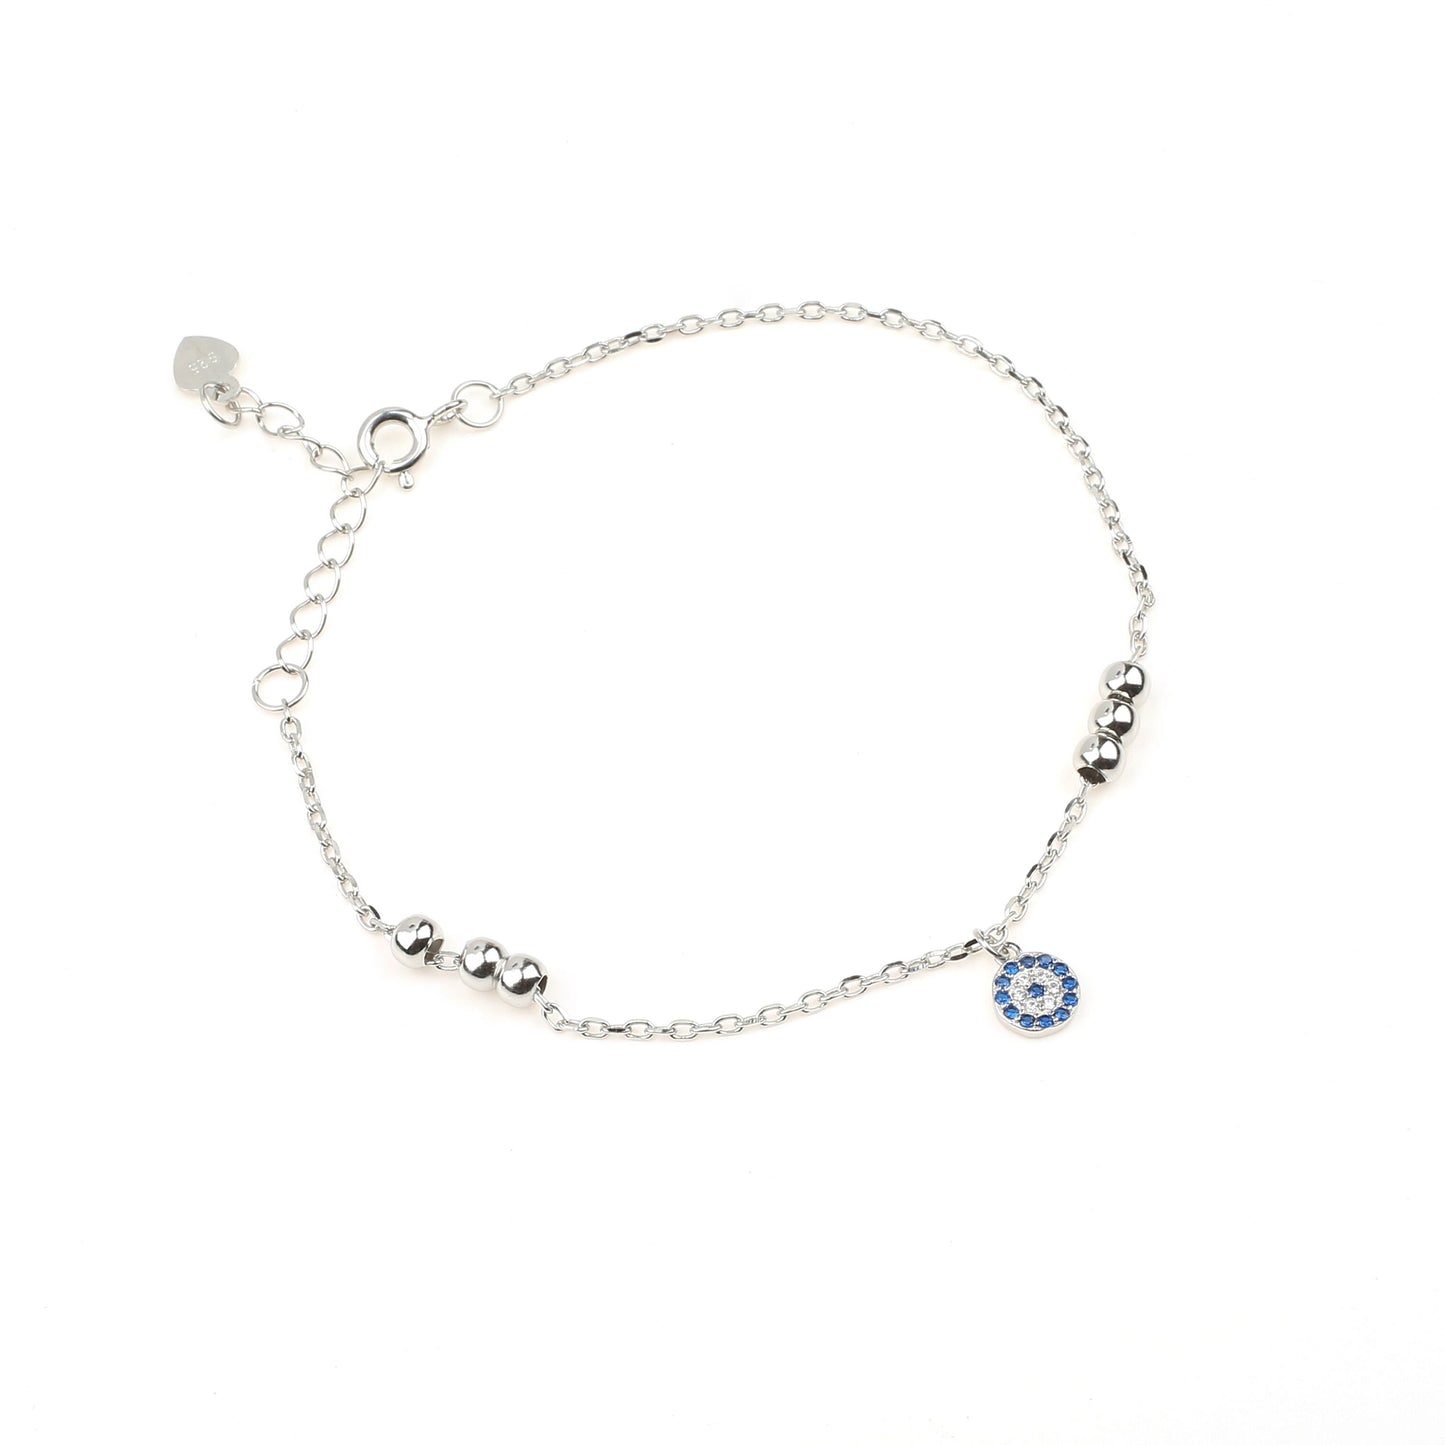 Round Evil Eye Charm 925 Sterling Silver Bracelet adorned with zirconia white and blue stones and and solid silver beads